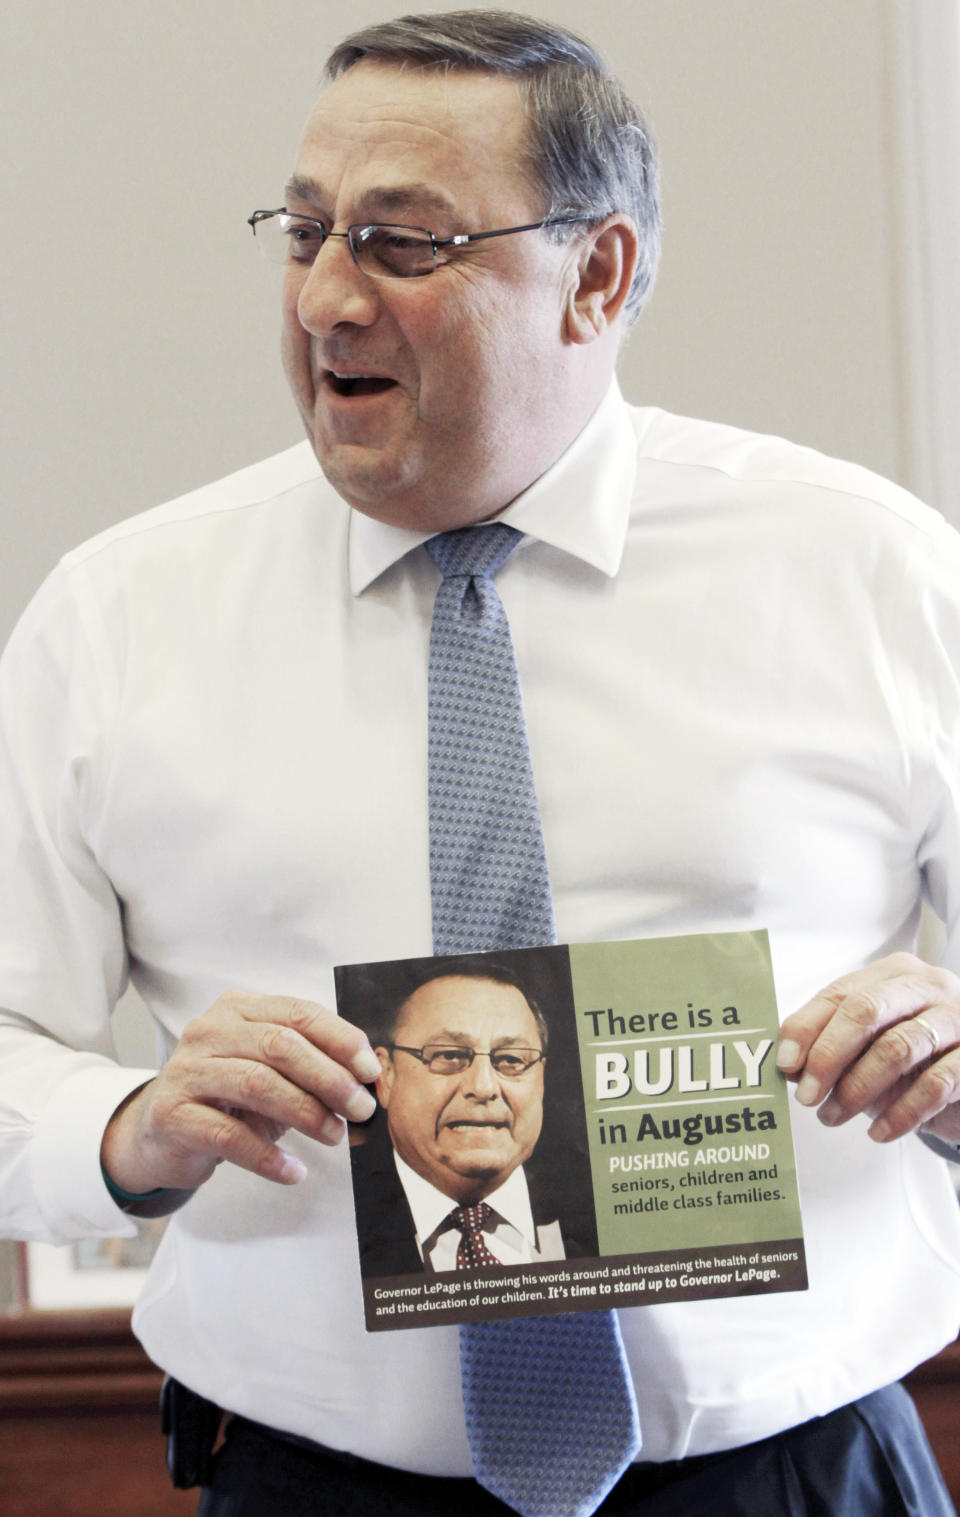 In this Friday, April 27, 2012 photo, Gov. Paul LePage talks about his sense of humor while holding a poster that reads "There is a bully in Augusta pushing around seniors, children and middle class families," during an interview with the Associated Press at his office at the State House in Augusta, Maine. Critics are putting pressure on LePage to apologize for referring to the Internal Revenue Service as "the new Gestapo" during his radio address Saturday, July 7, 2012. (AP Photo/Pat Wellenbach)